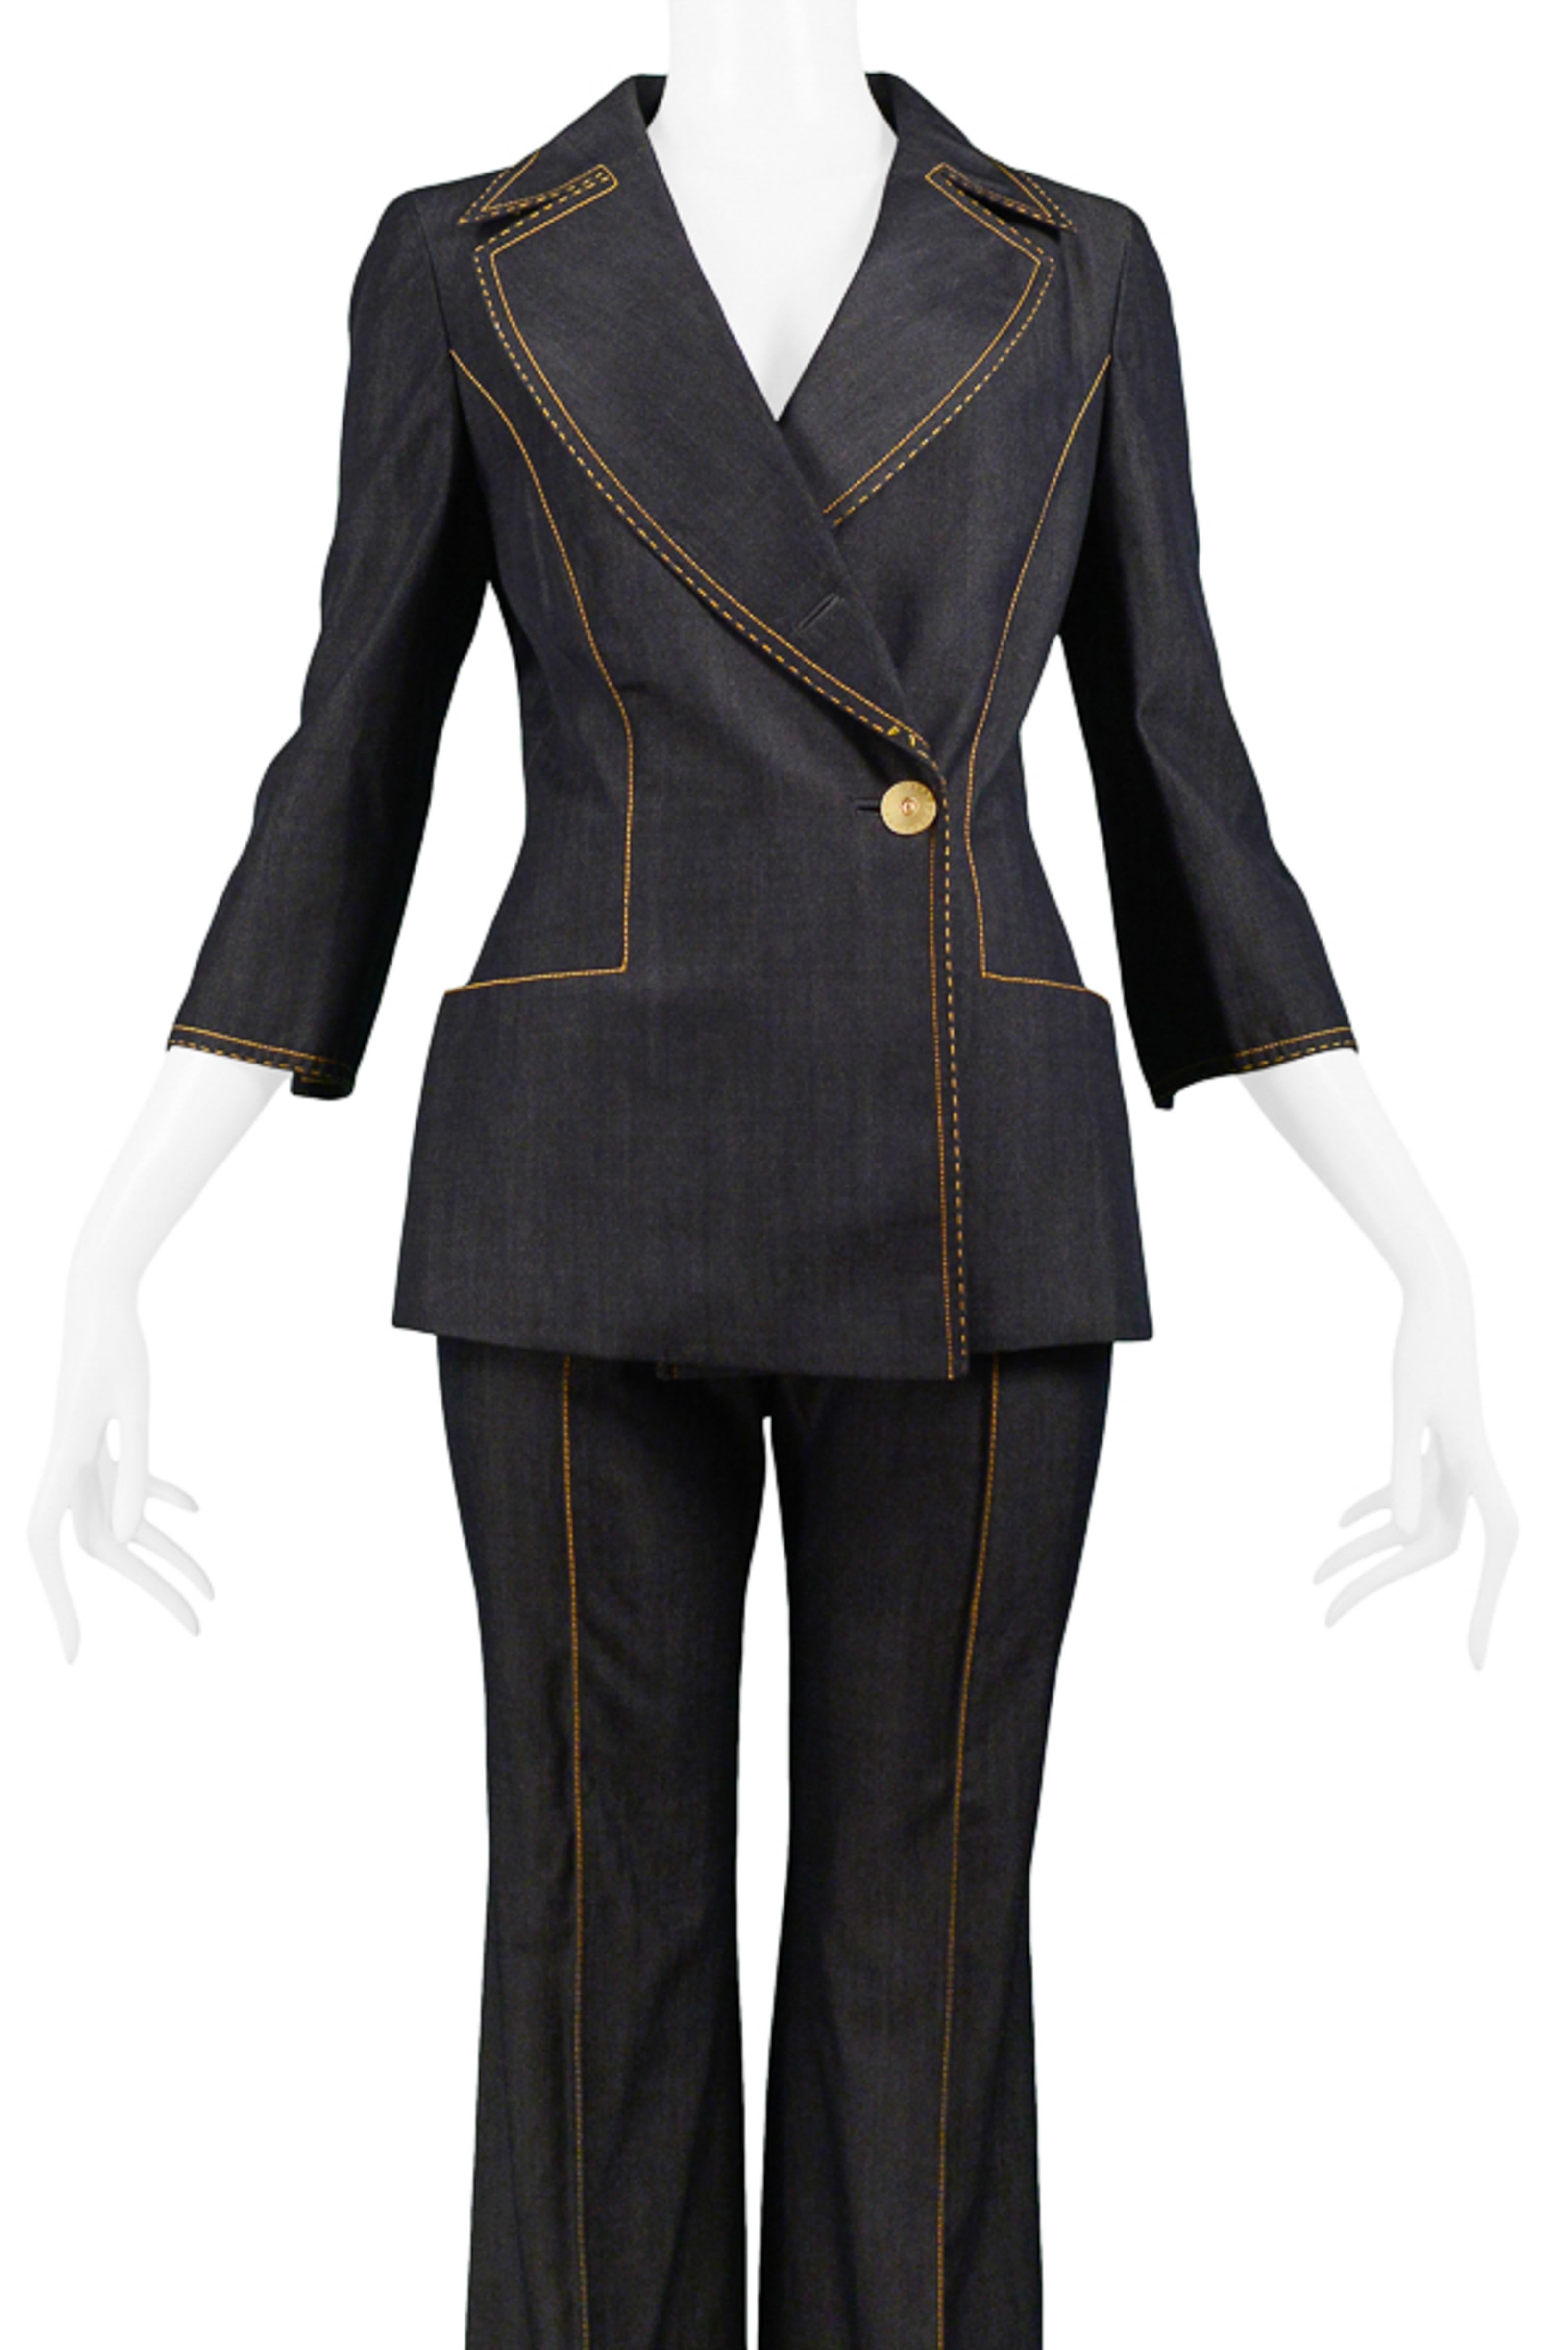 Gianfranco Ferre Denim Inspired Wool Suit With Yellow Stitching 1999 In Excellent Condition For Sale In Los Angeles, CA